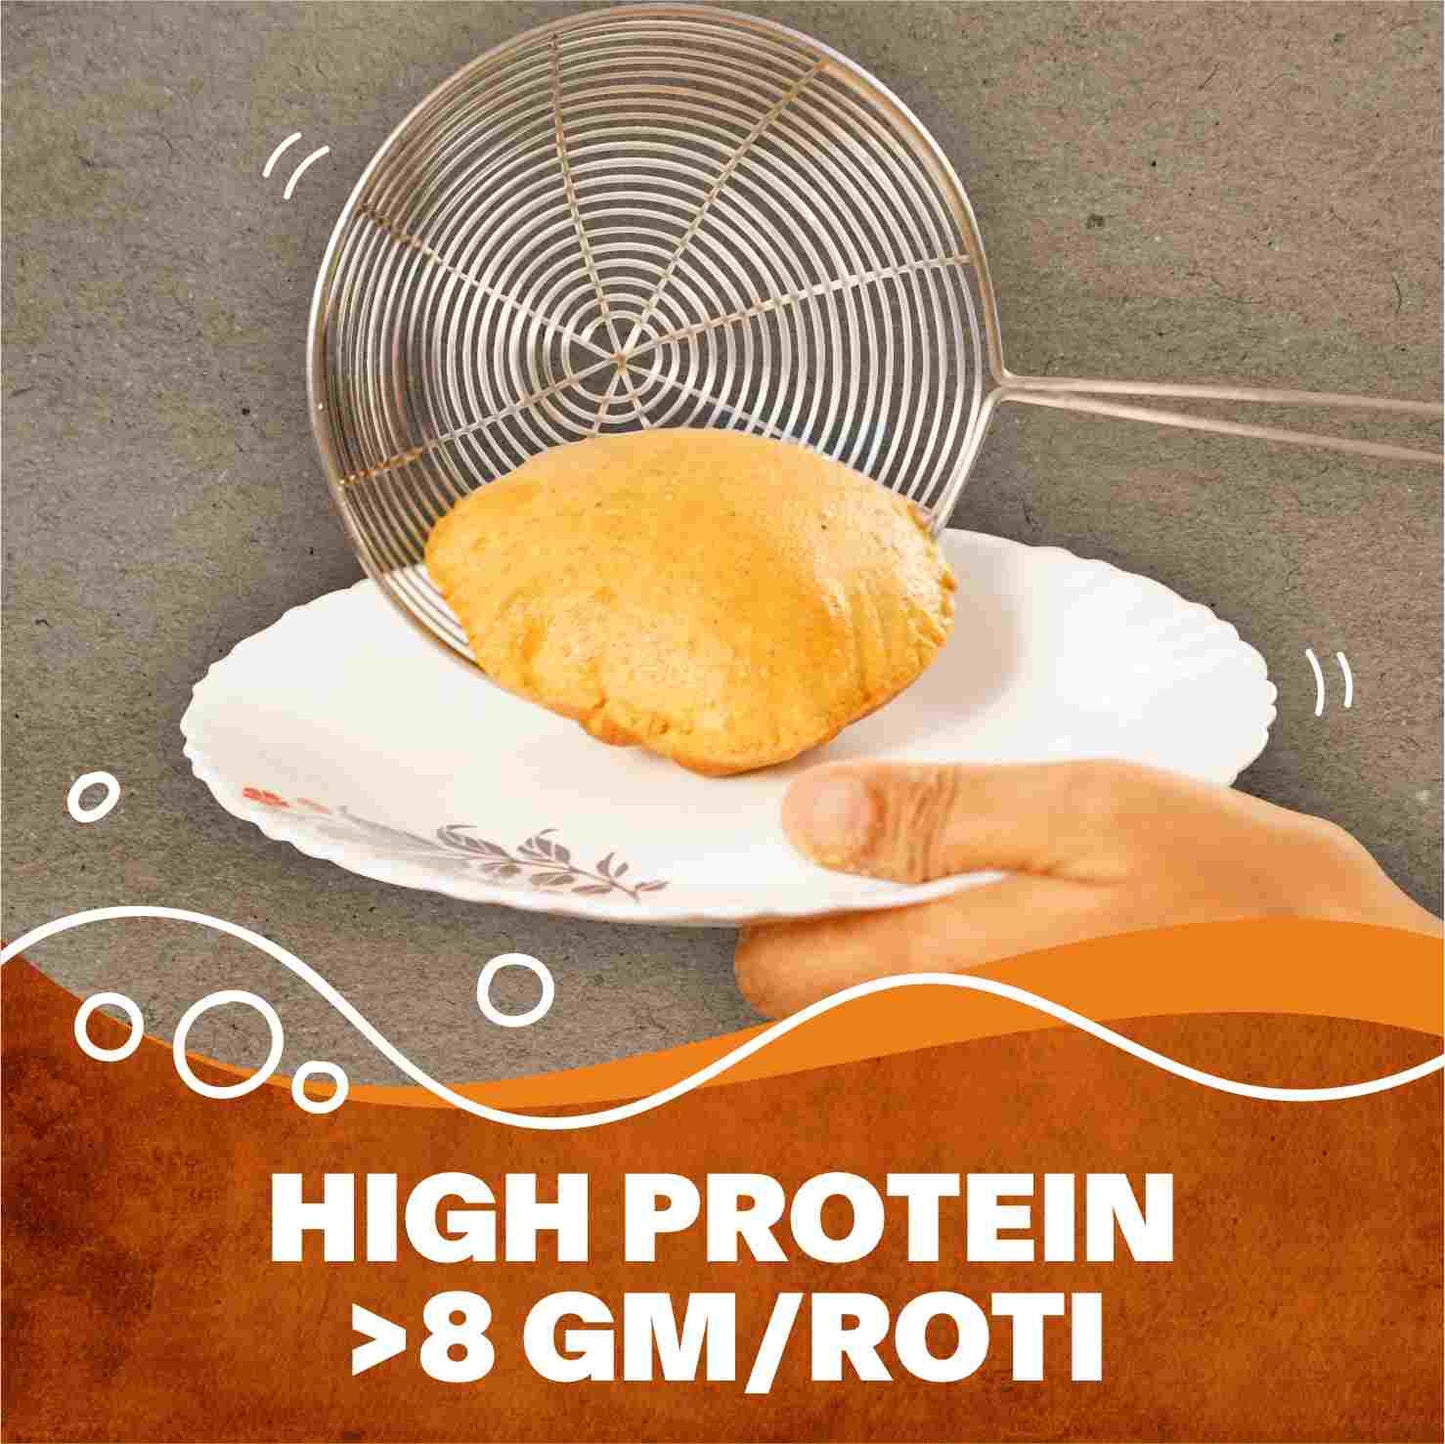 Ultra Low Carbohydrate Roti Atta Flour (1 kg)